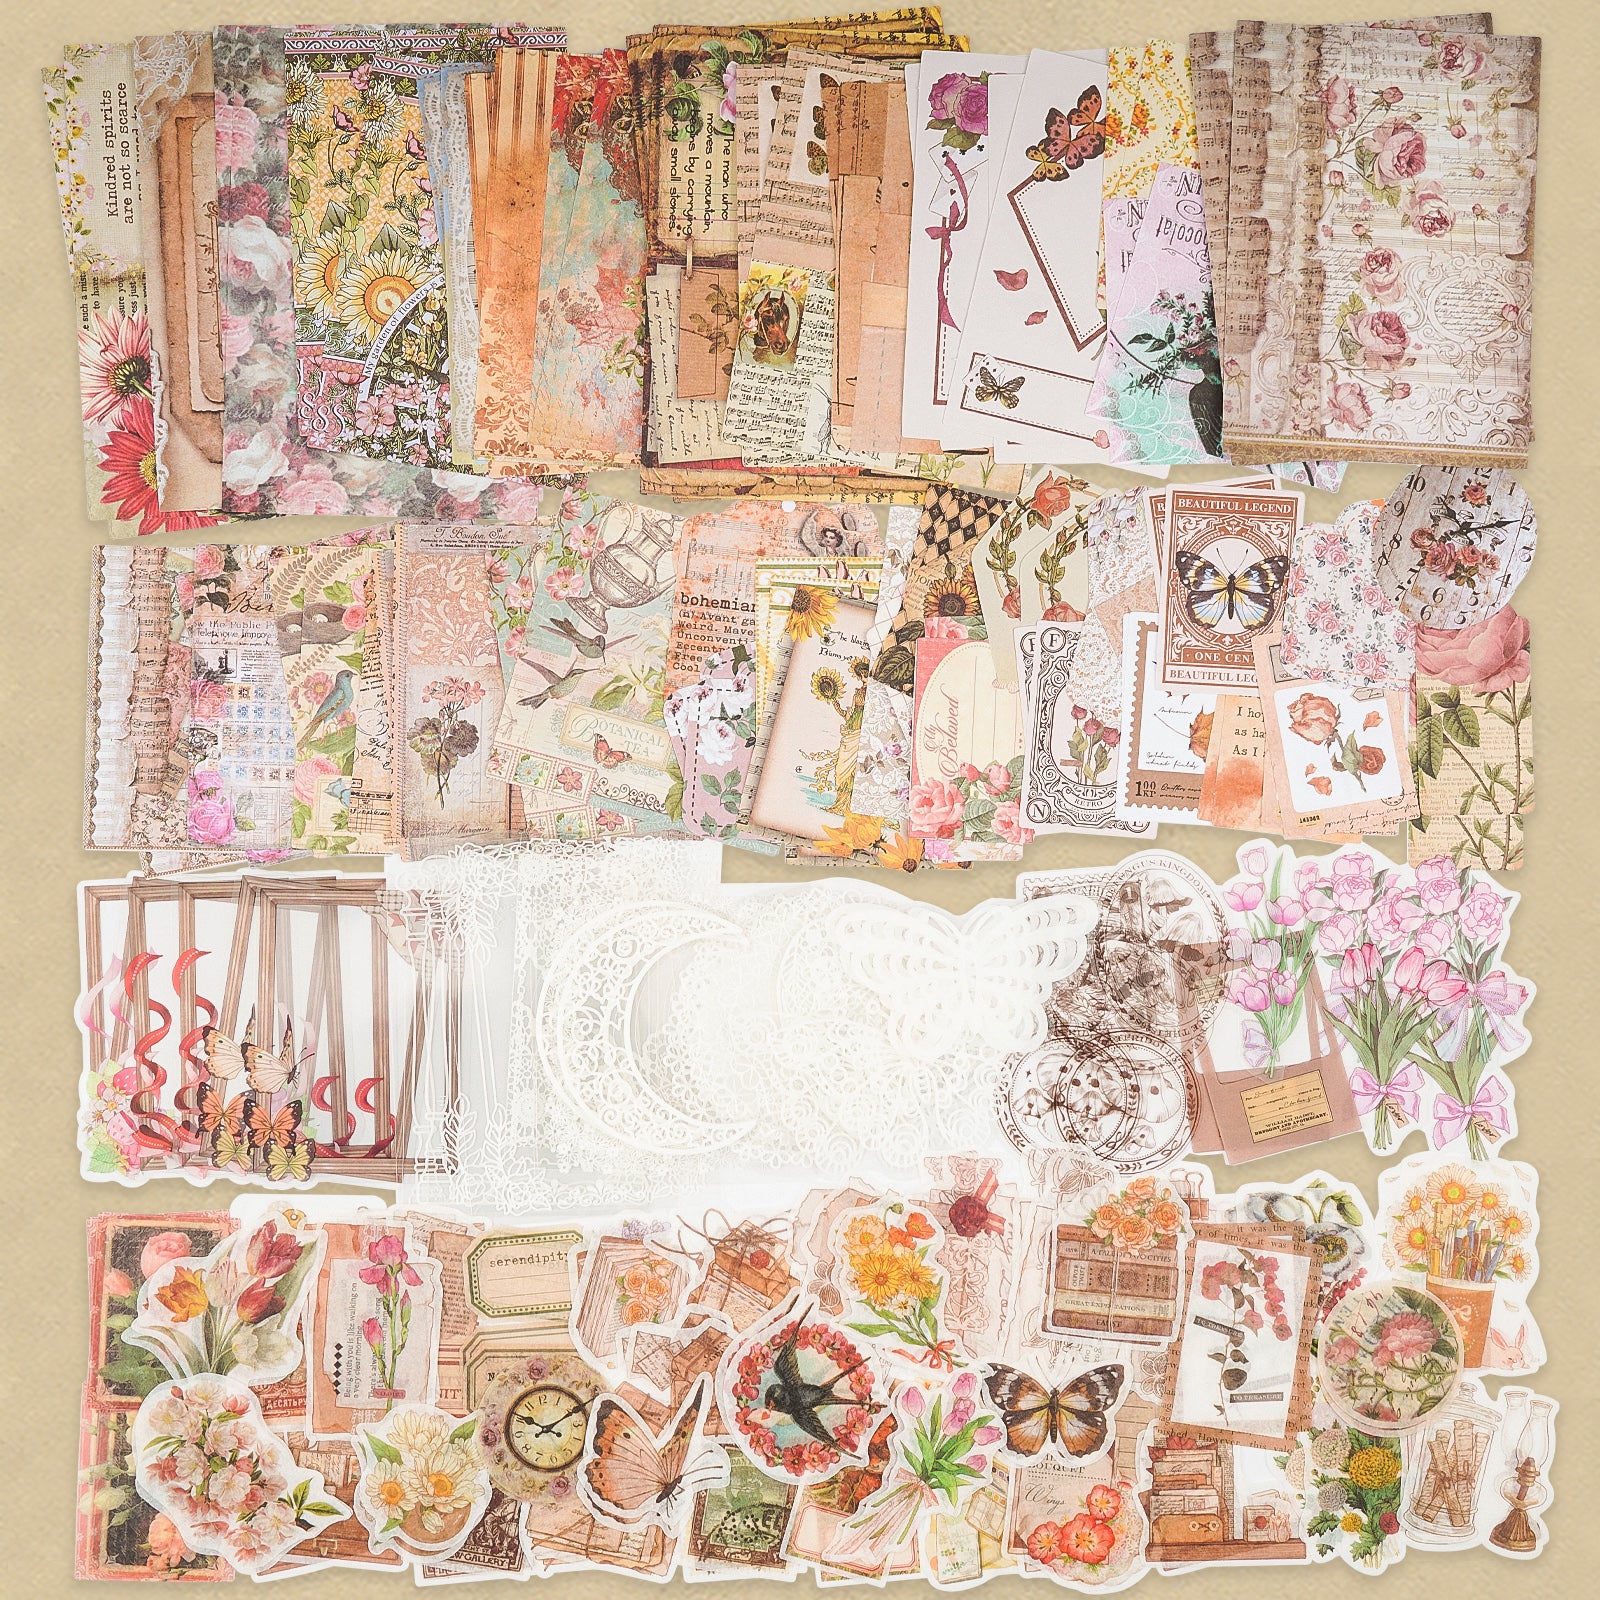 Craft Supplies Vintage Journal Ephemera Pack by CATaireen Scrapbook  Accessories Card Making Collage Kit Stickers for Scrapbox